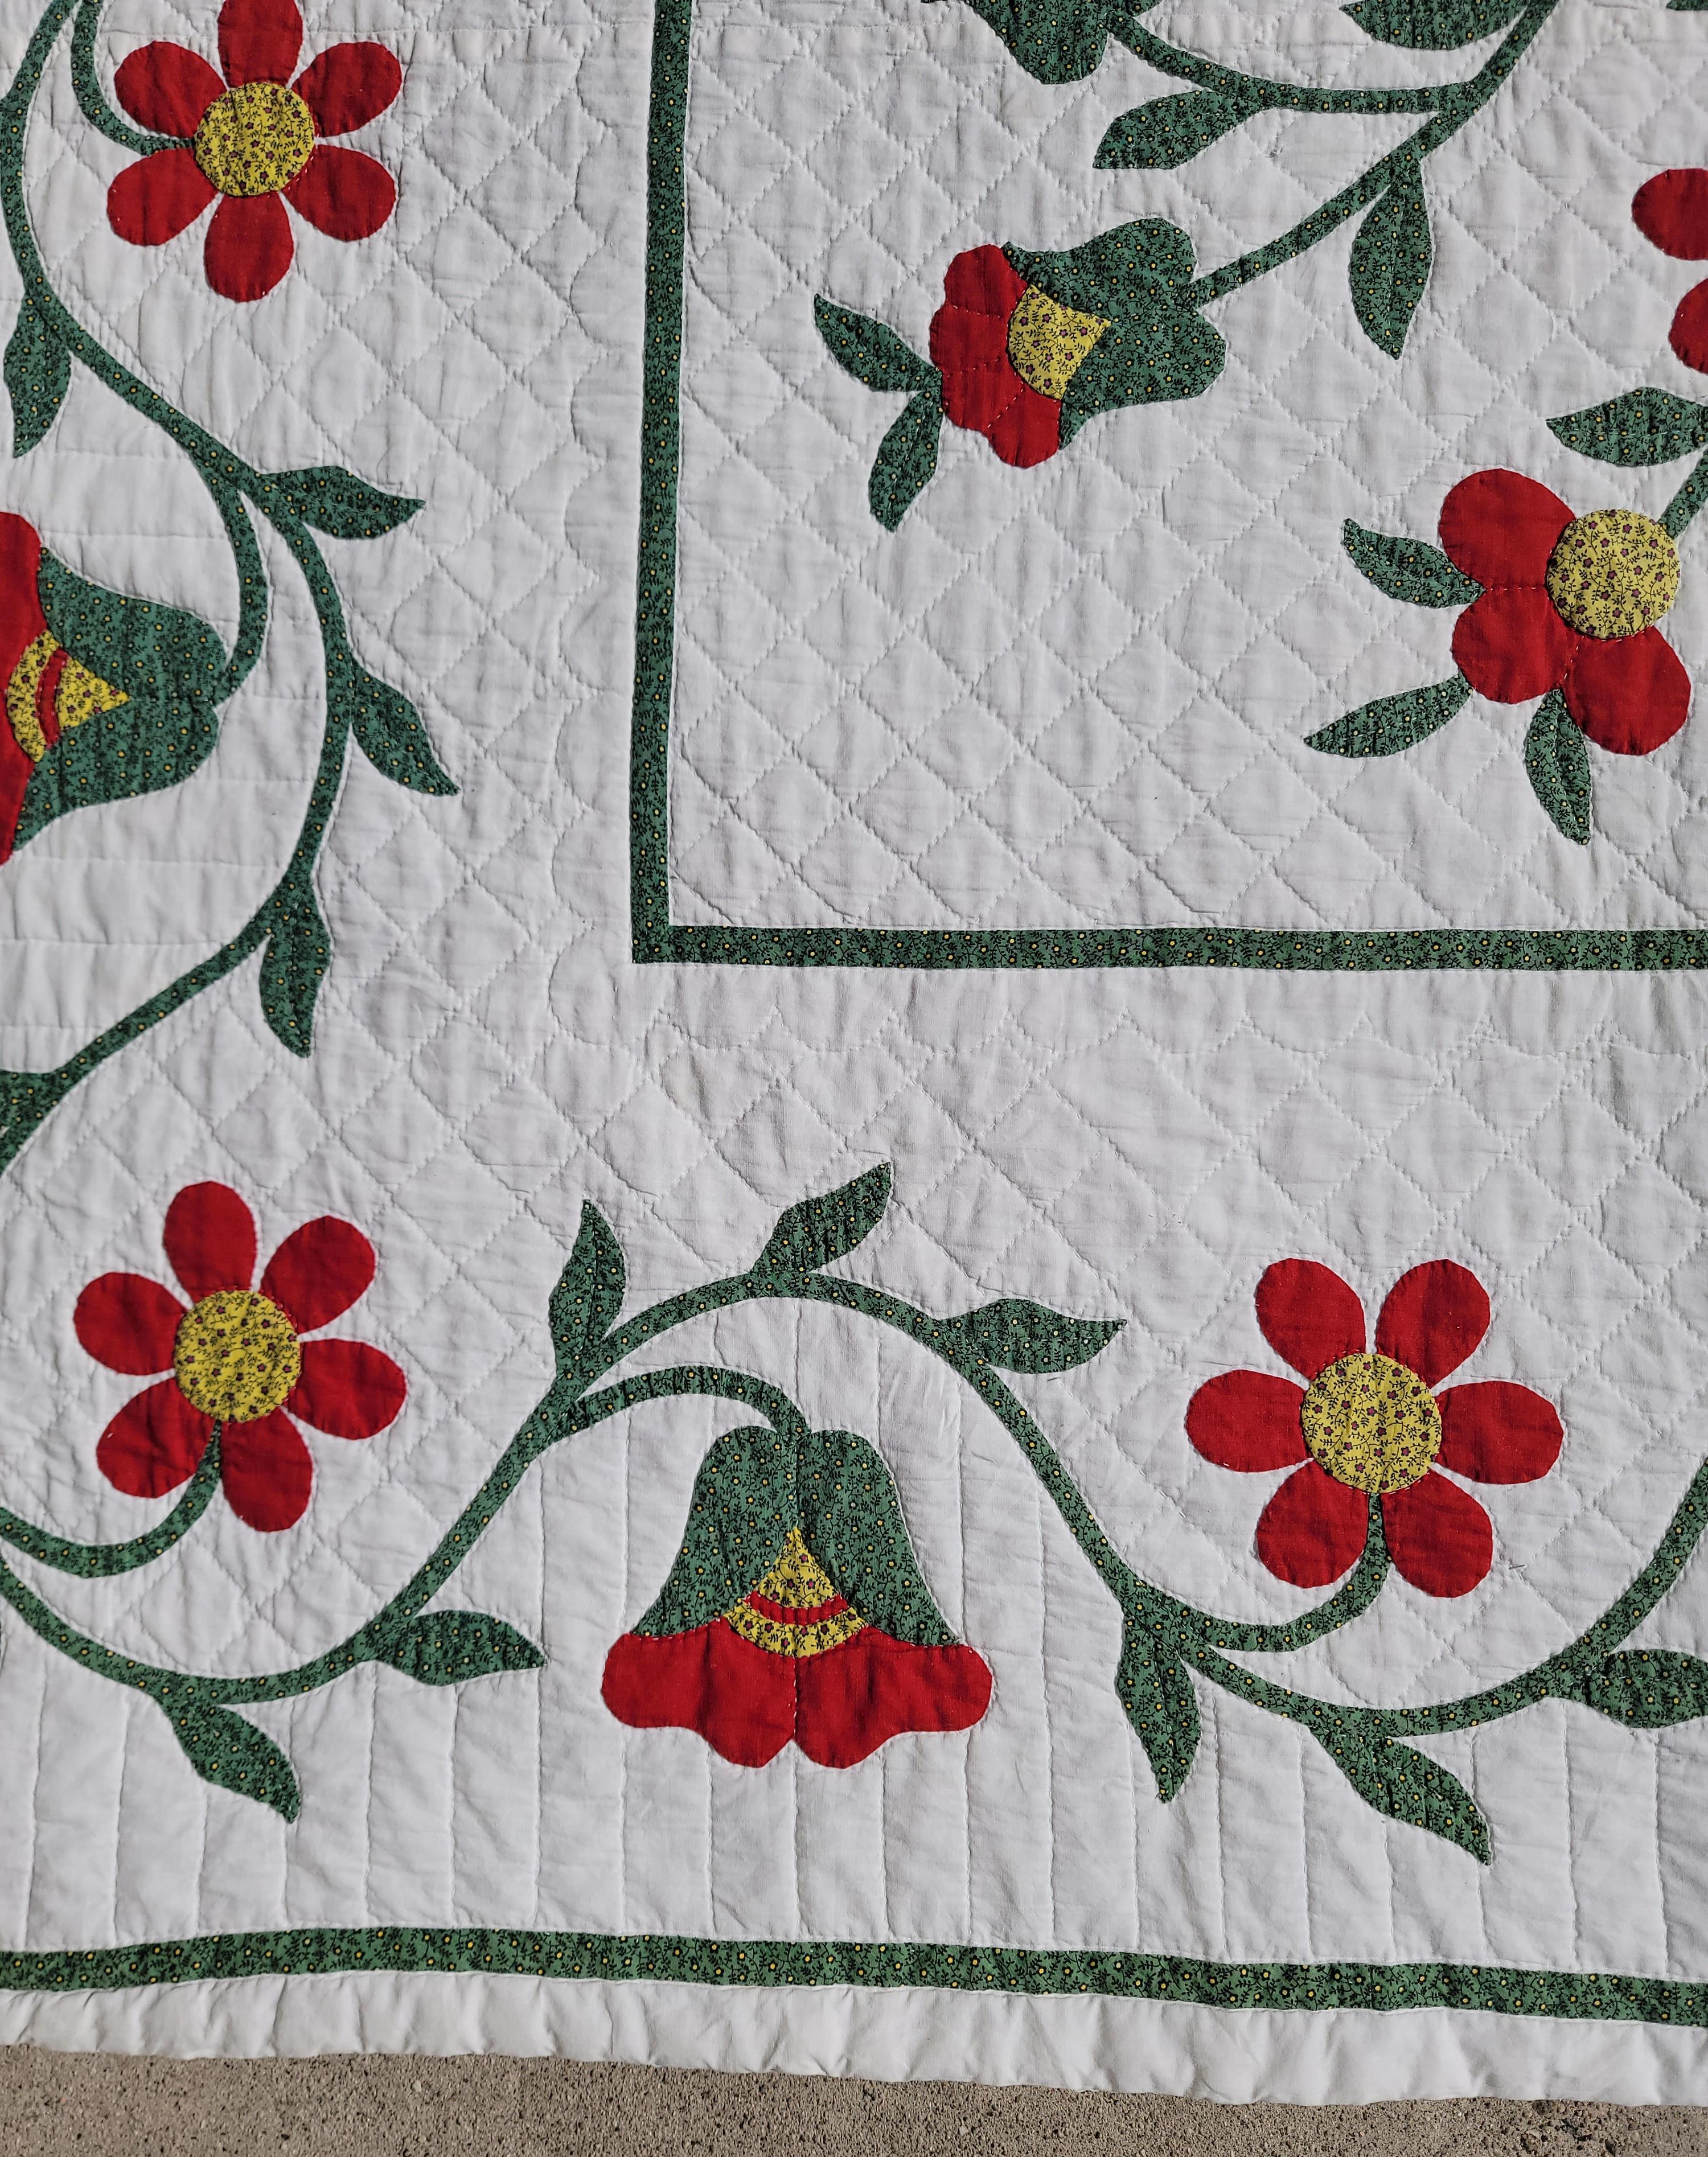 Hand-Crafted 1930's Appliqué Eagle Quilt For Sale